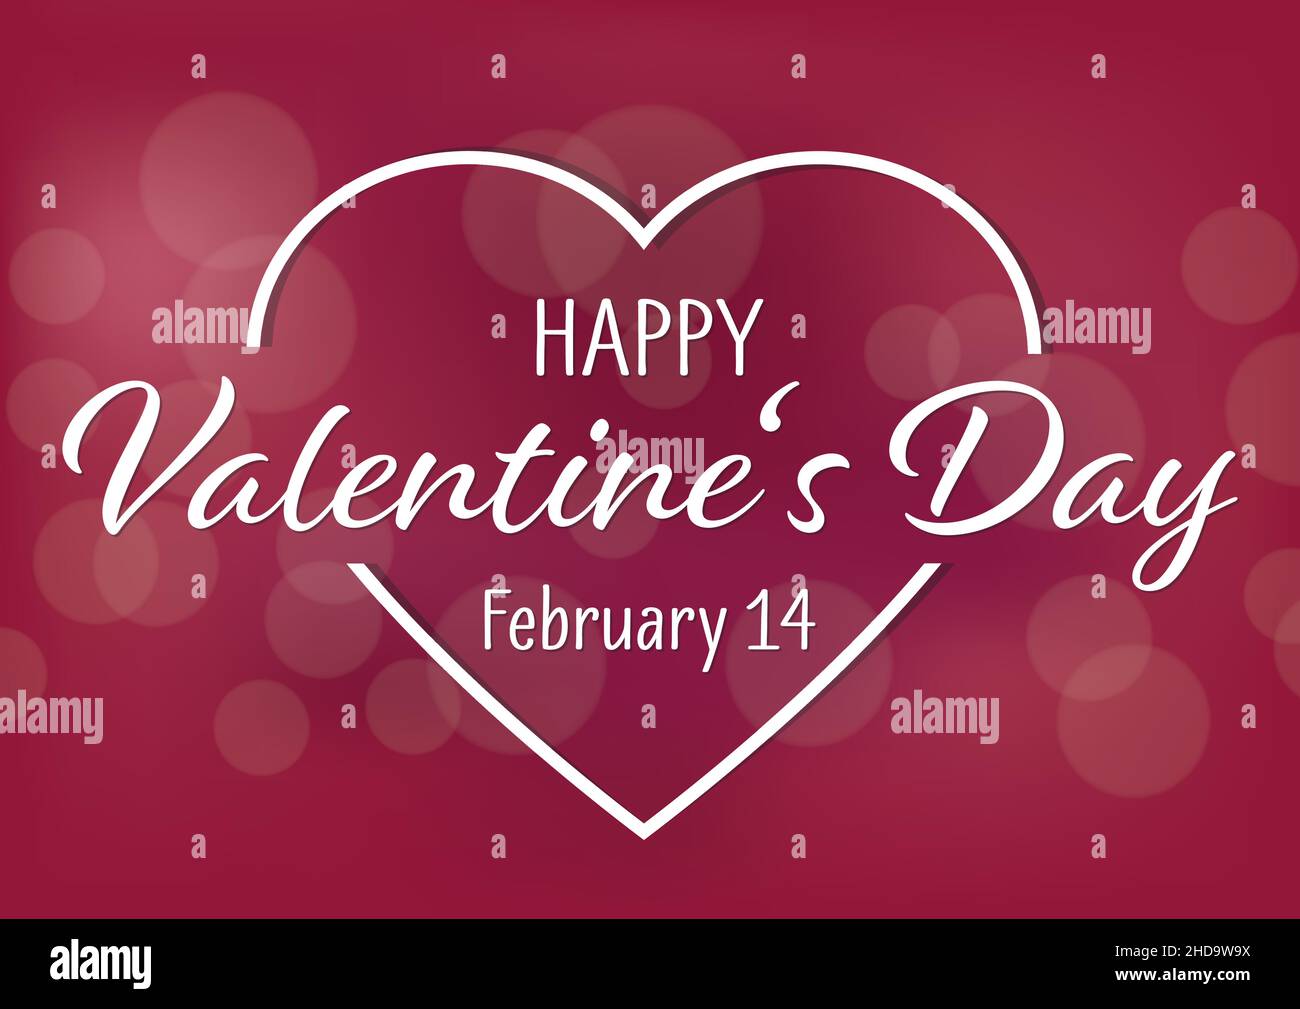 Happy Valentine's Day - Heart and text on a red background with bokeh. Stock Vector